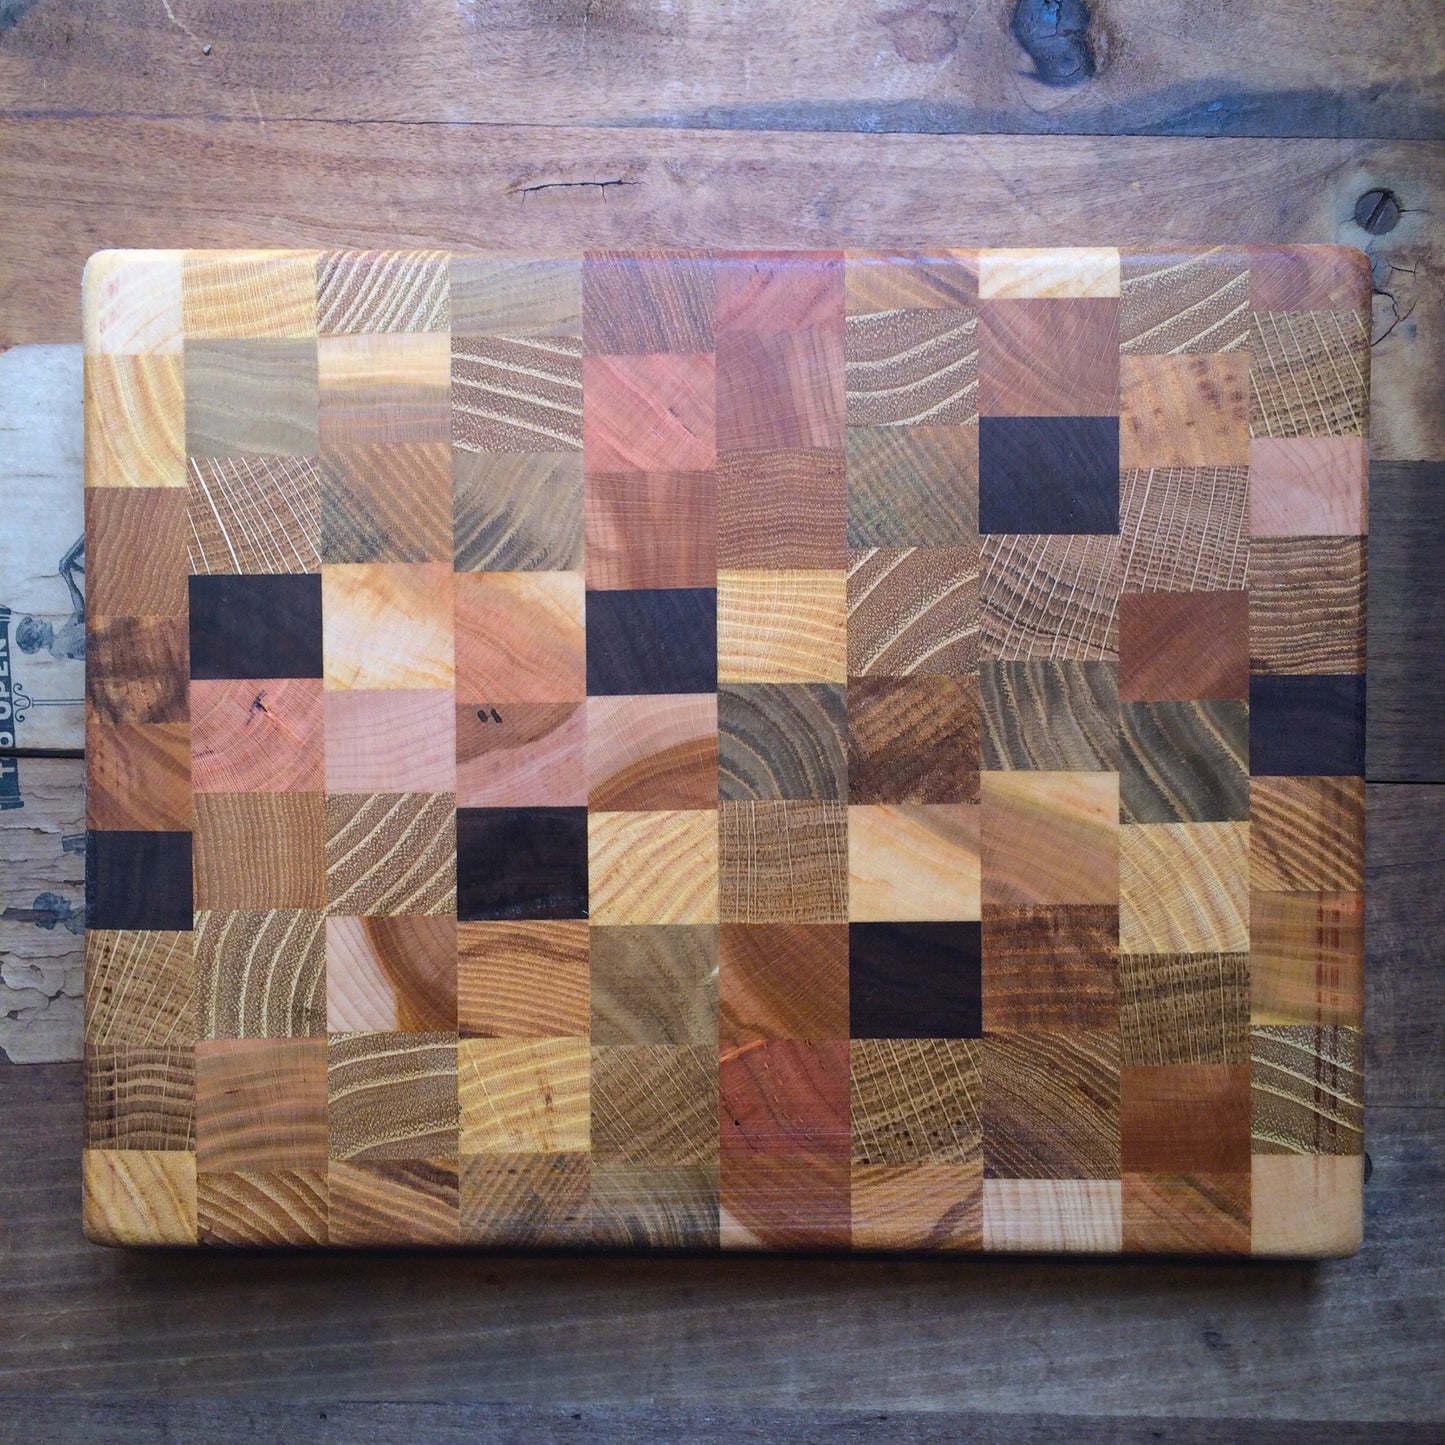 A Steve Reid wooden presentation board featuring a Checkerboard Wood Cutting Board design of various wood types laid out in a geometric pattern.